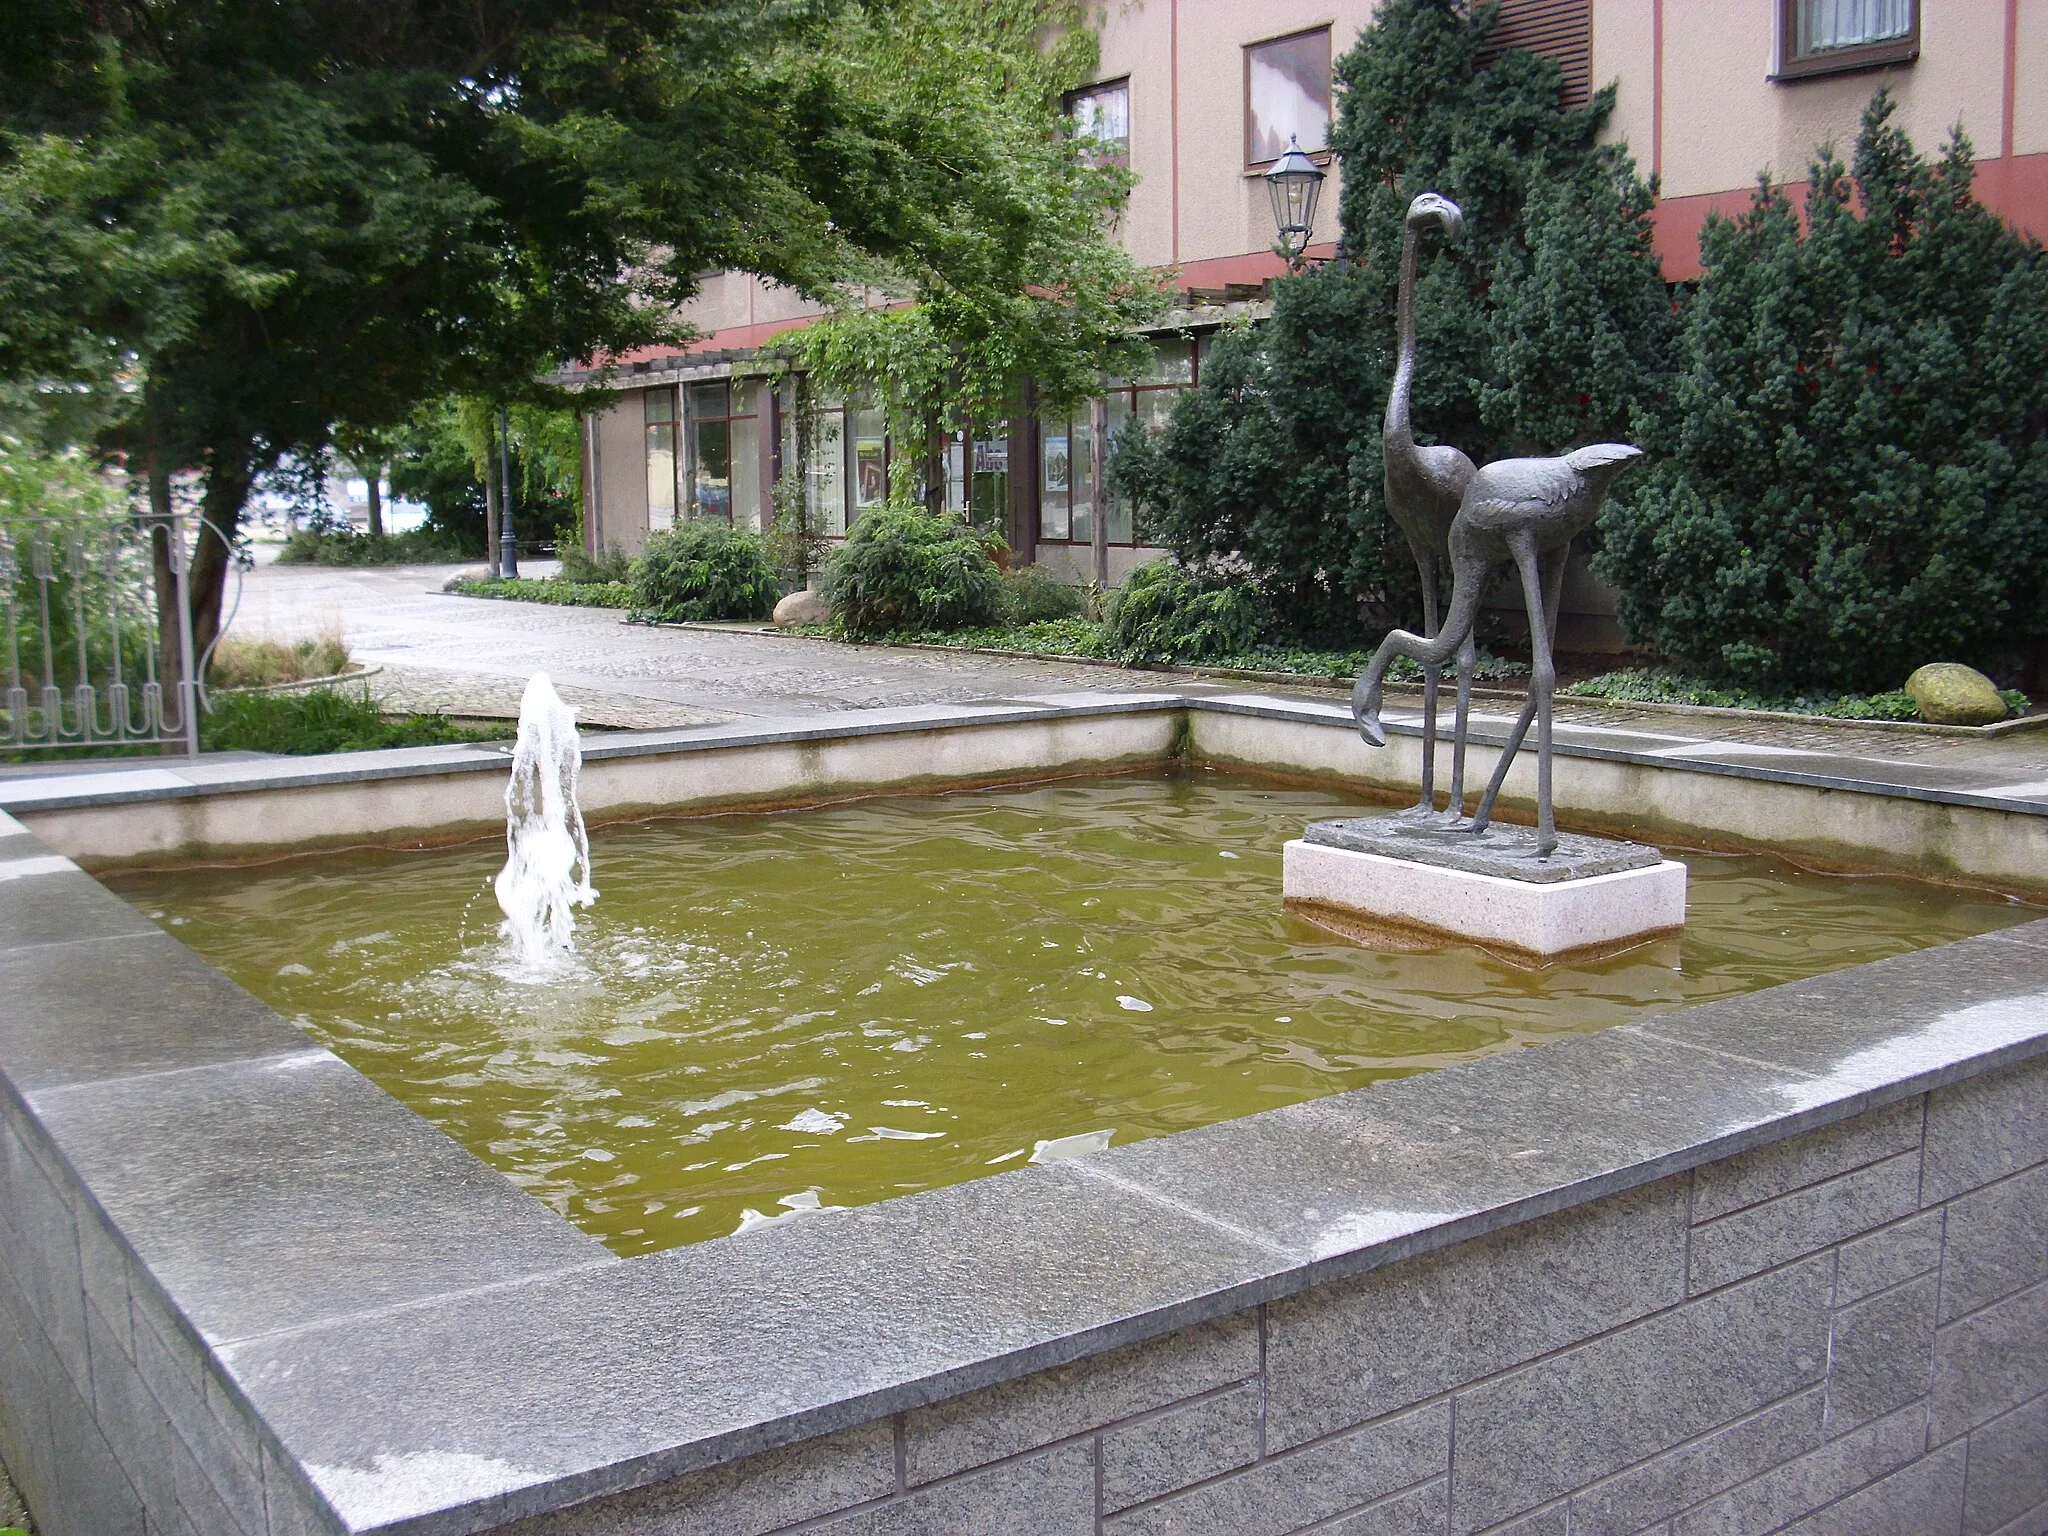 Photo showing: A fountain basin with flamingo figures in the city of Zwickau